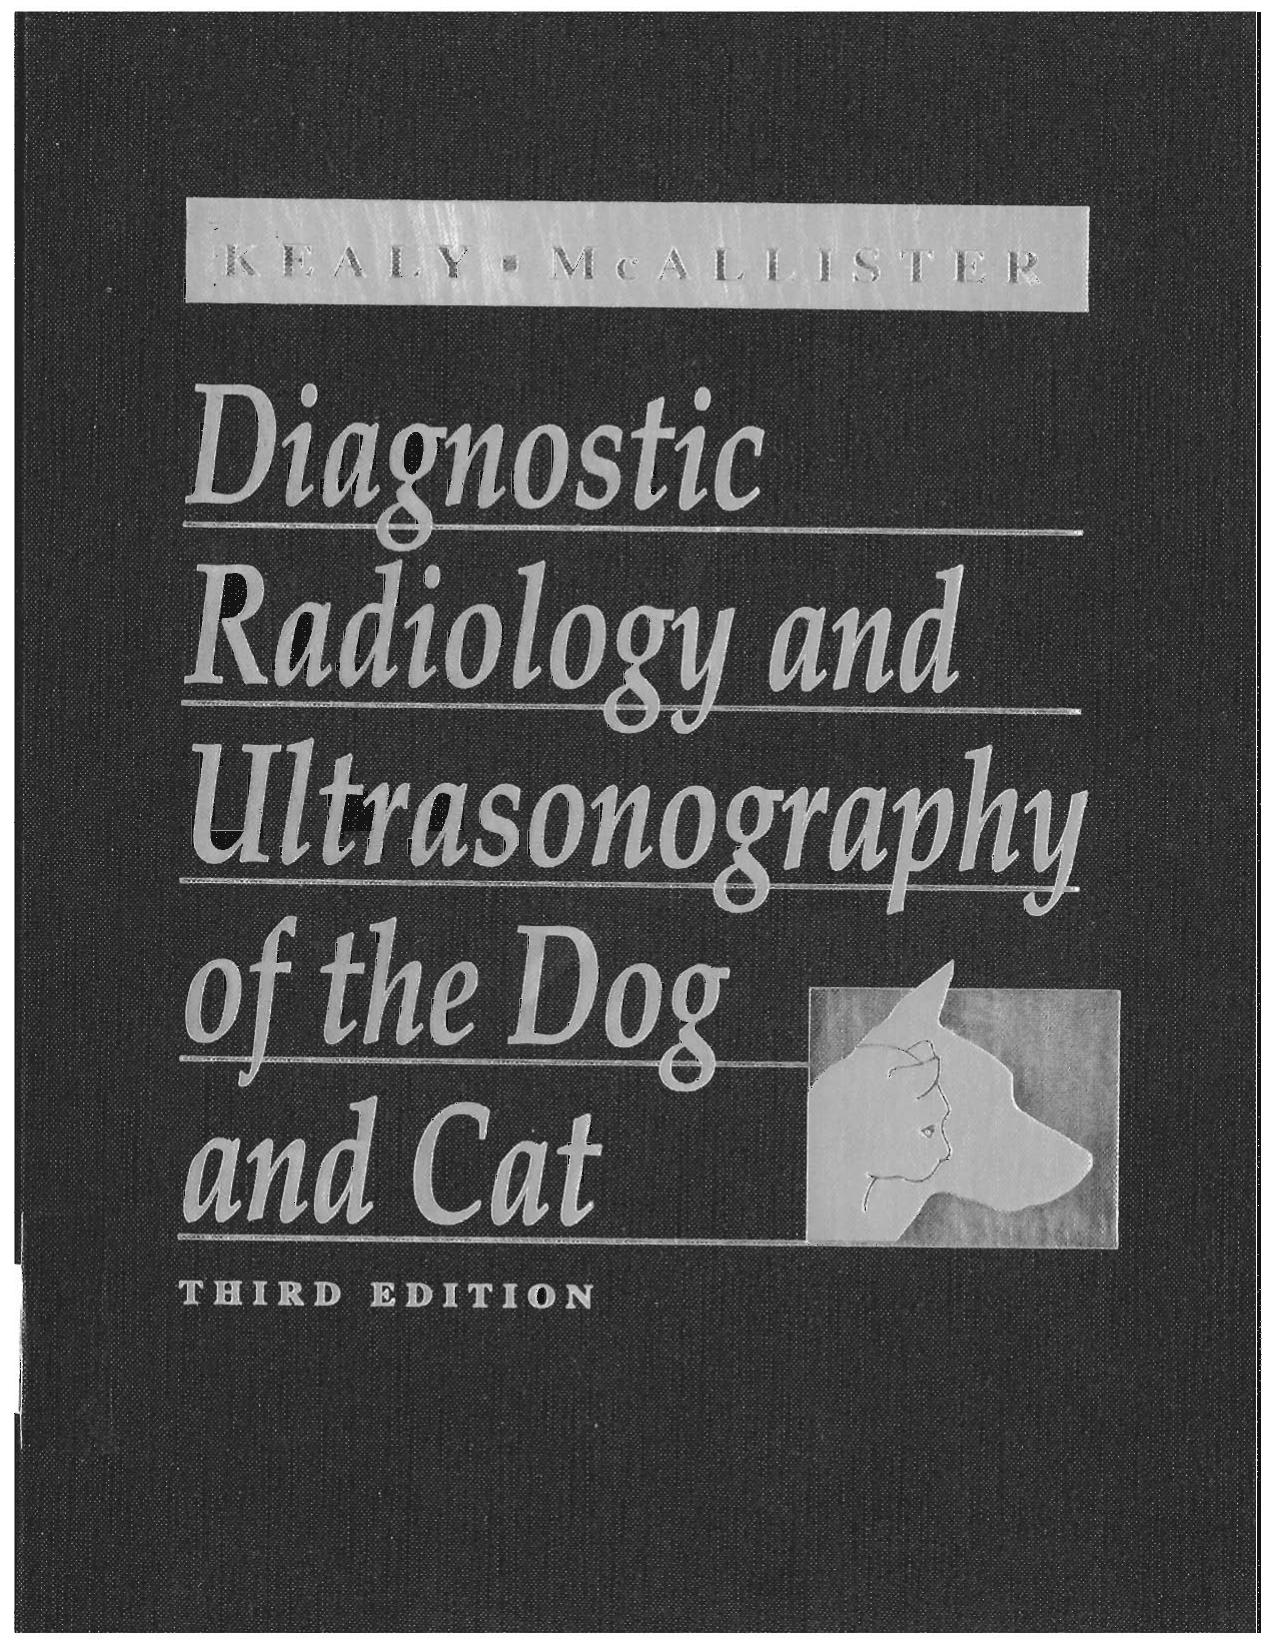 Diagnostic radfology and ultrasonography of the dog and cat  J. Kevin Kealy, 2000